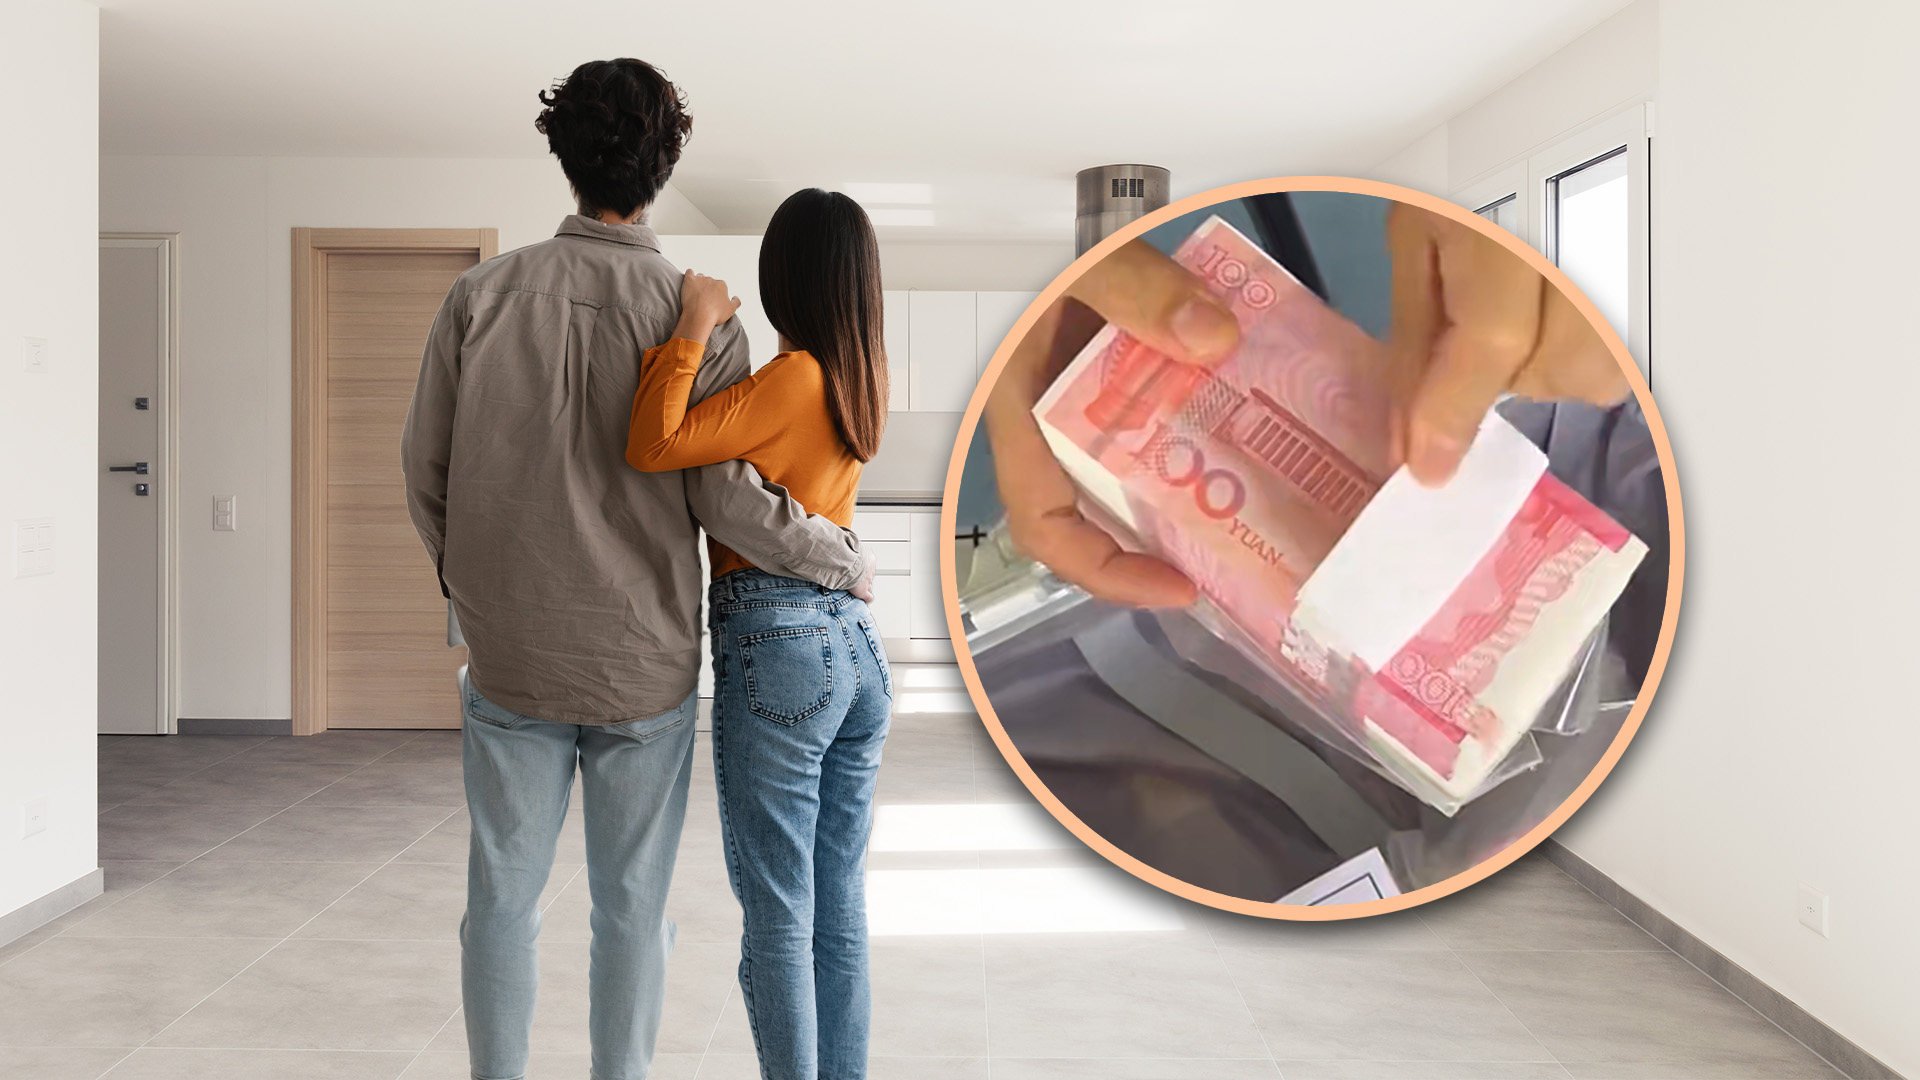 A man in China who was under pressure from his would-be in-laws to buy his girlfriend a flat bought fake money online to keep them happy and ended up being detained by the police. Photo: SCMP composite/Shutterstock/Baidu